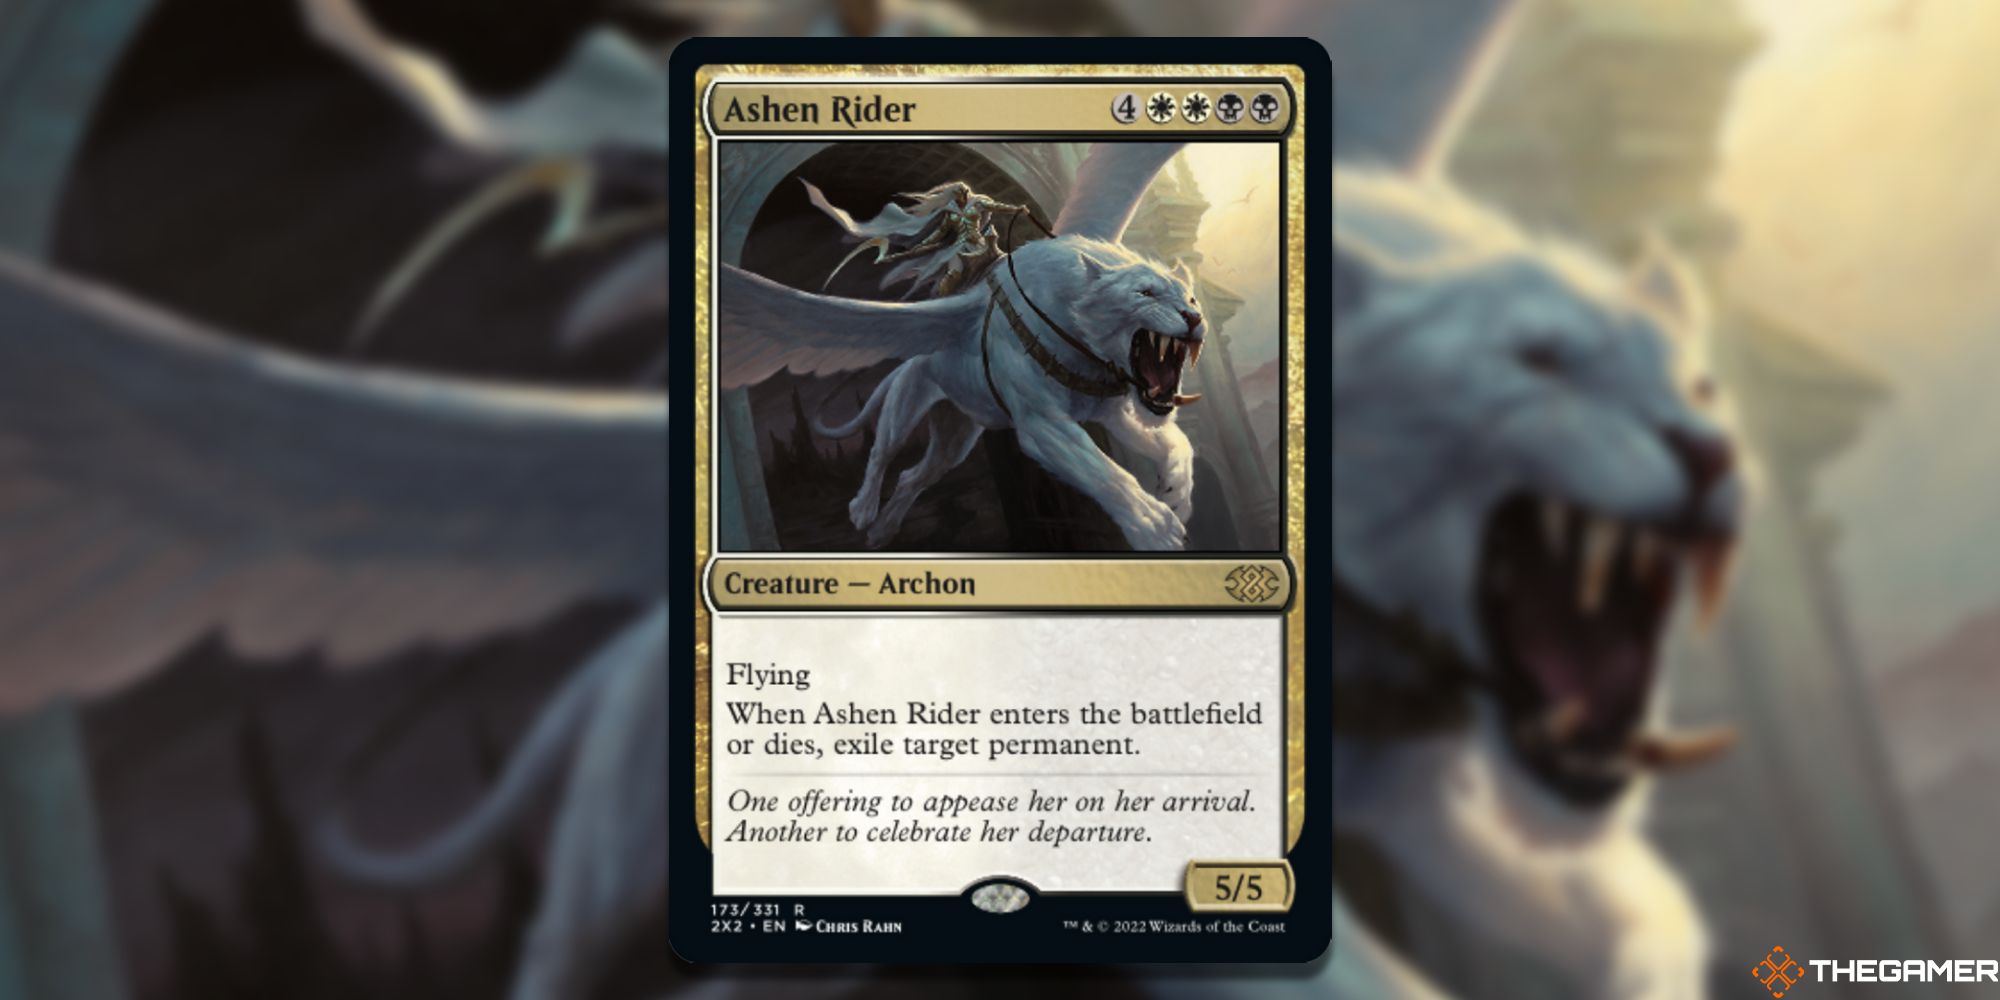 Image of the Ashen Rider card in Magic: The Gathering, with art by Chris Rahn